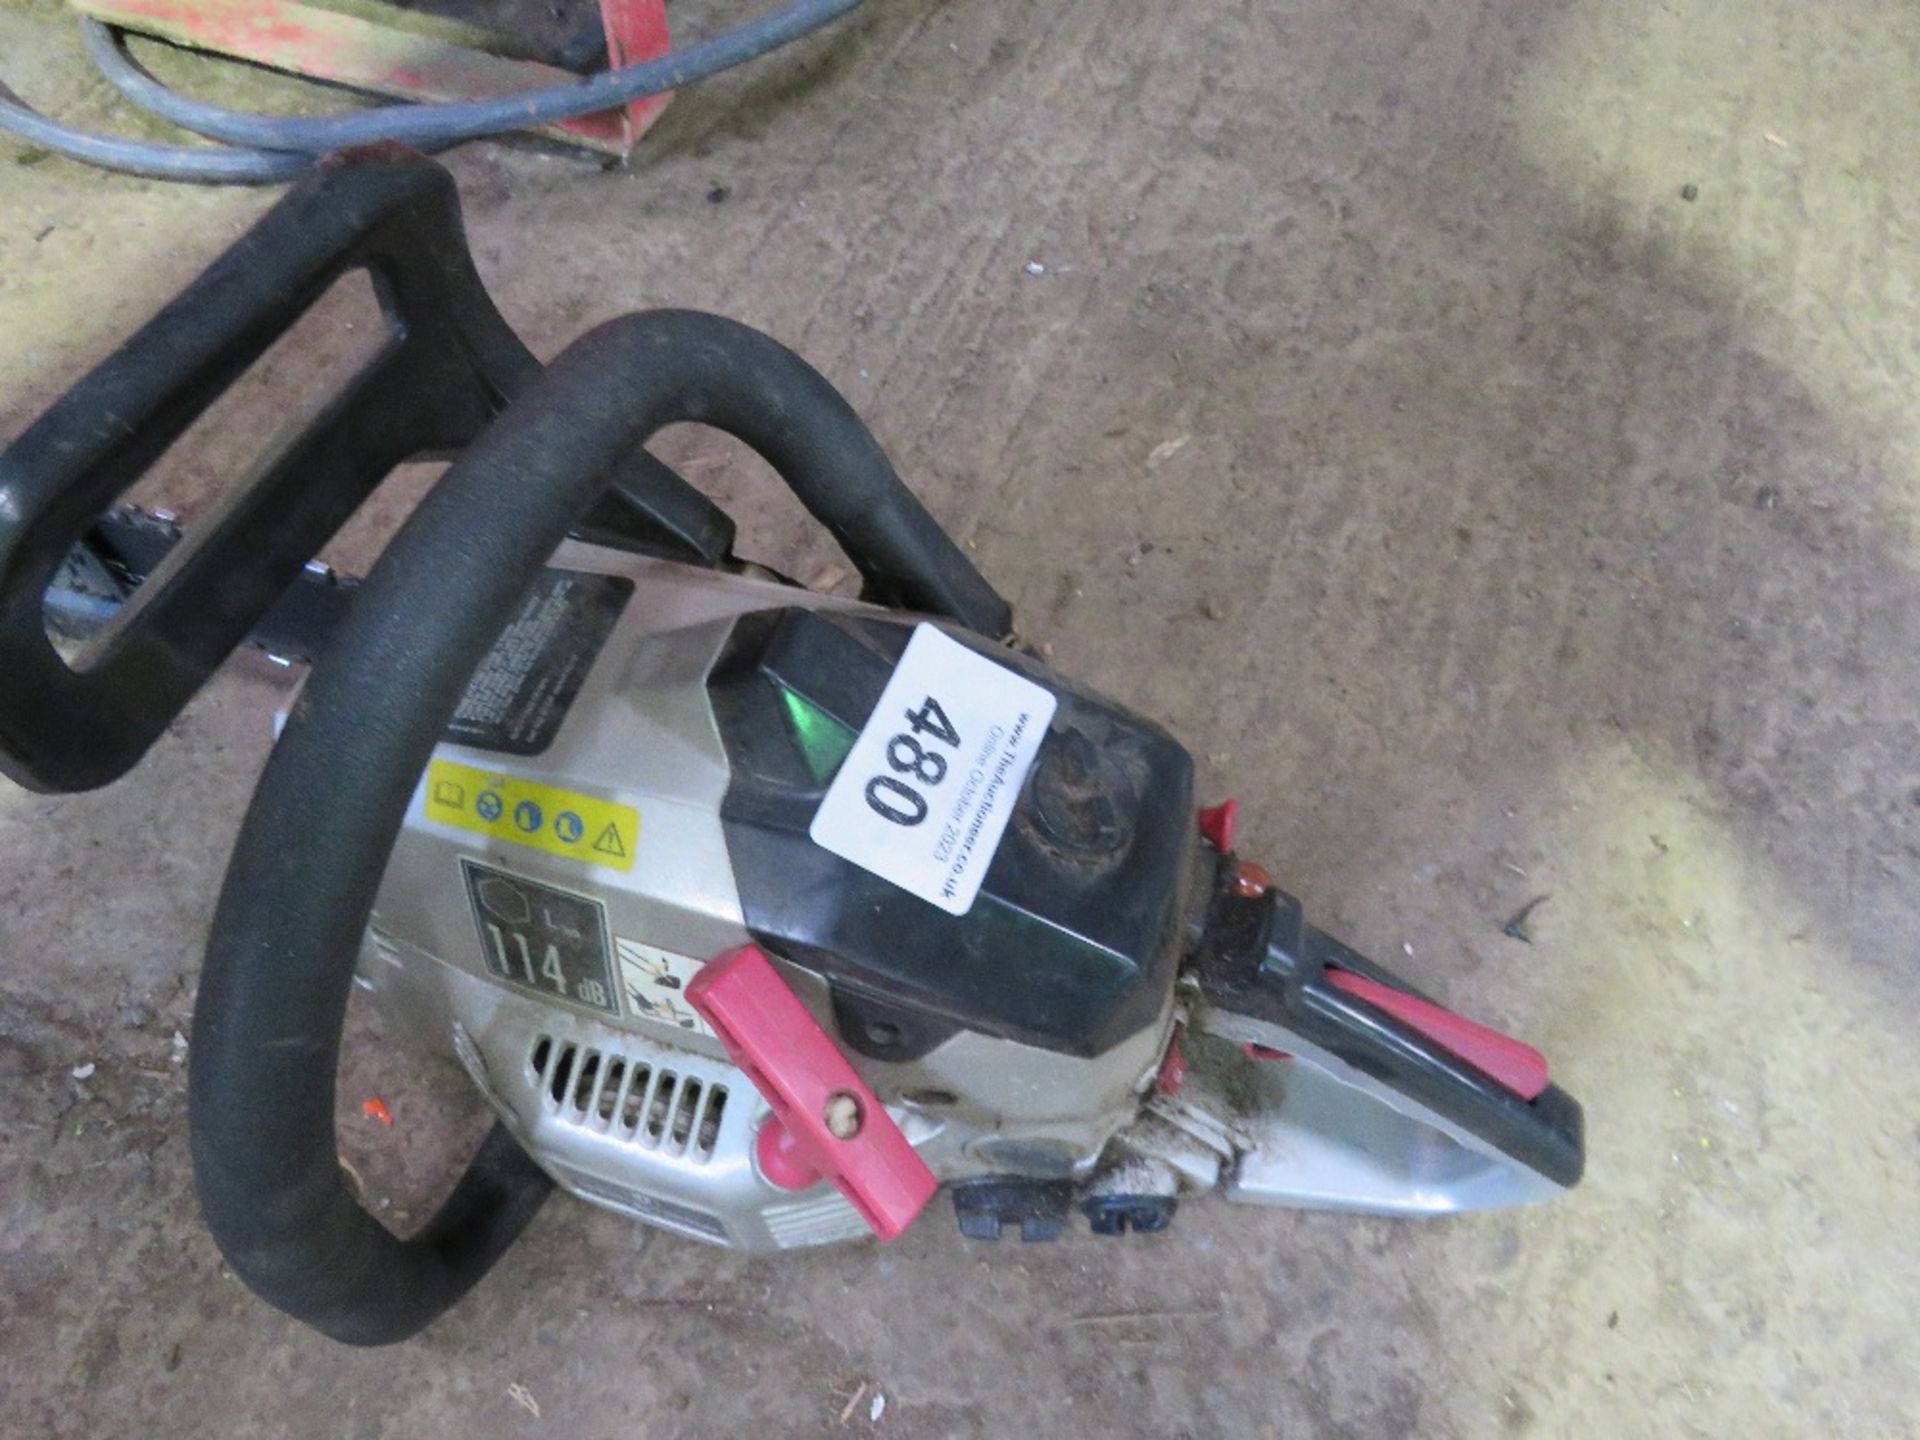 PETROL ENGINED CHAINSAW. - Image 2 of 3